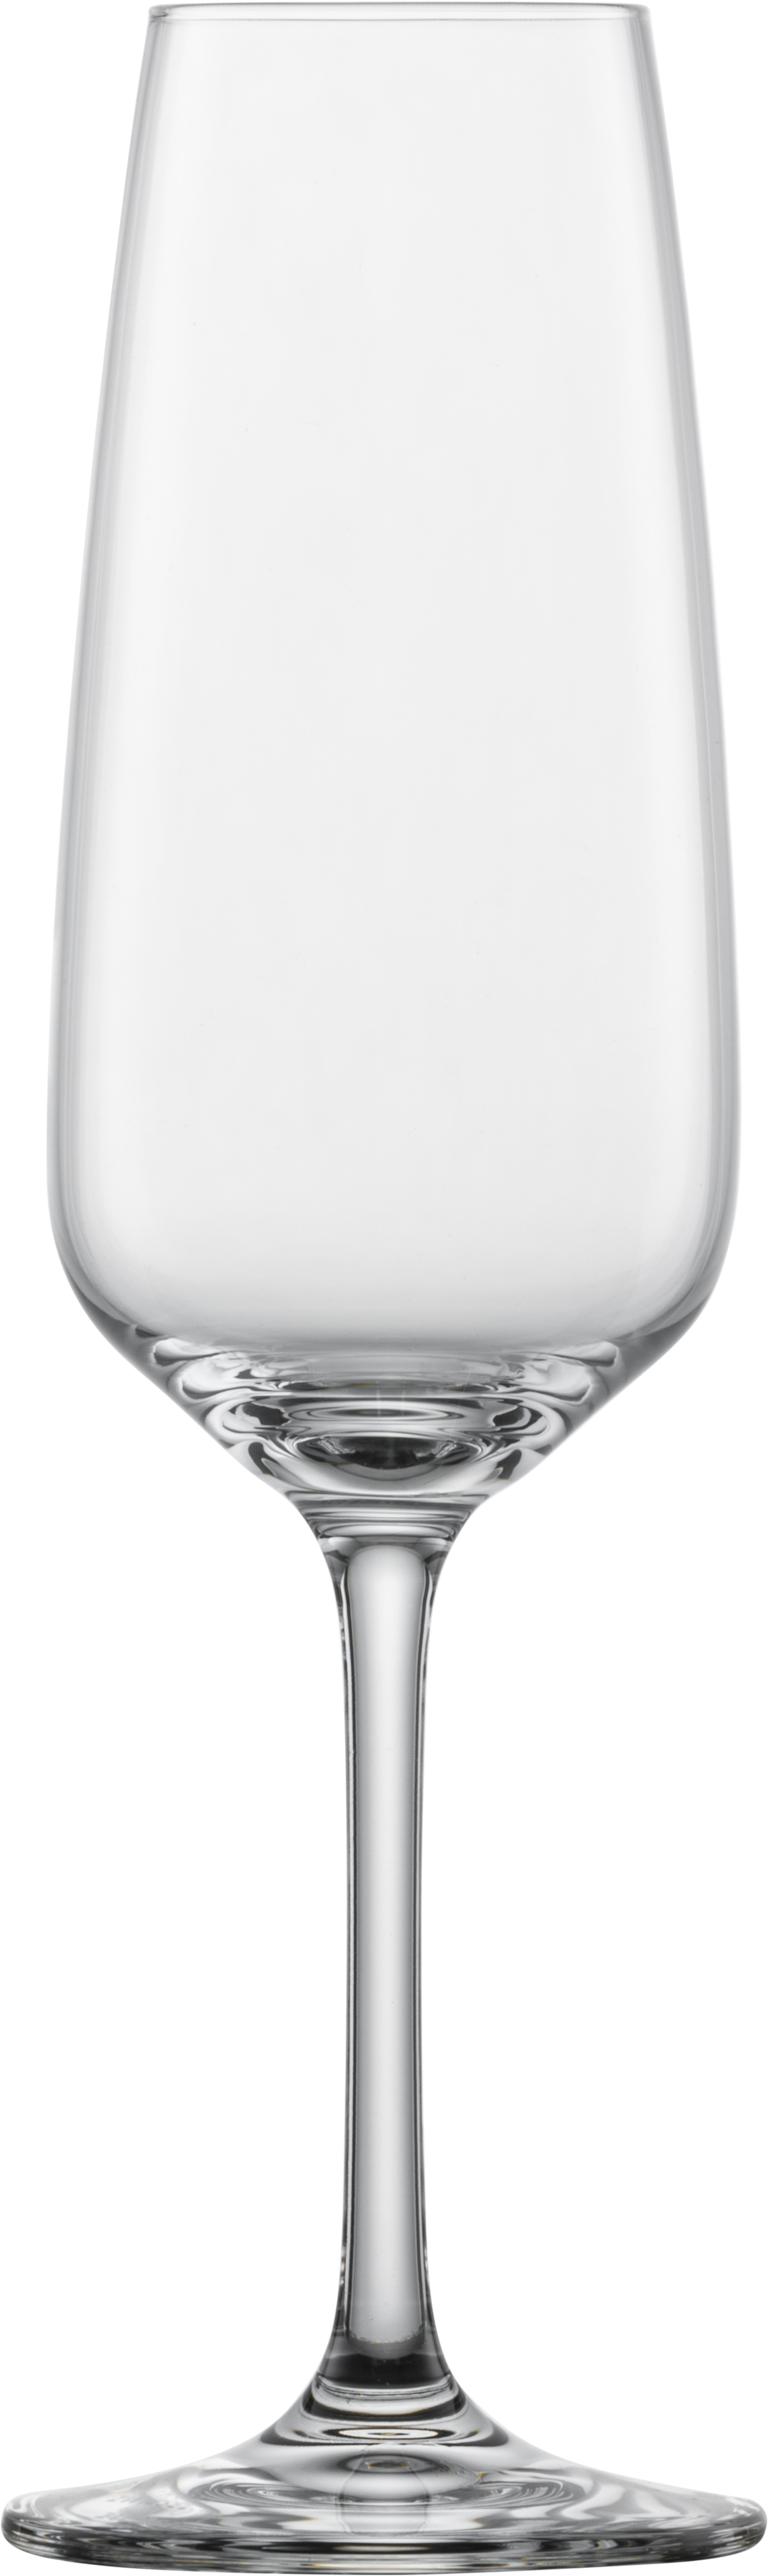 Schott Zwiesel Champagne Coupe Set of 6 #17700